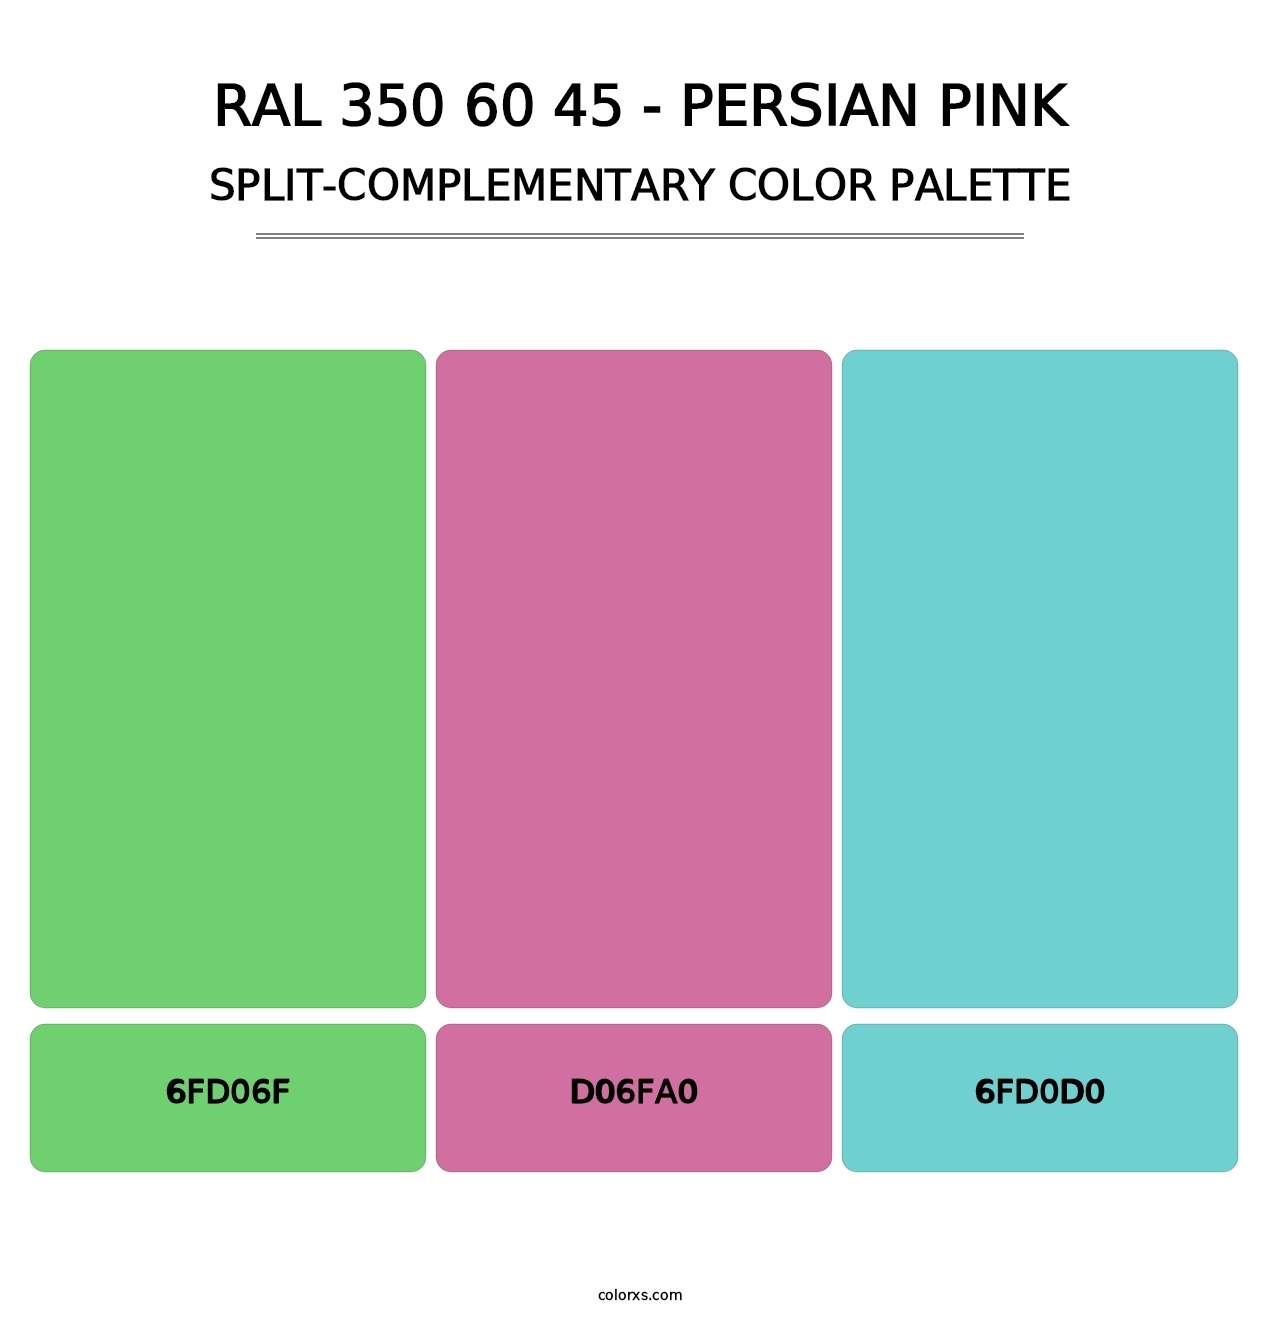 RAL 350 60 45 - Persian Pink - Split-Complementary Color Palette